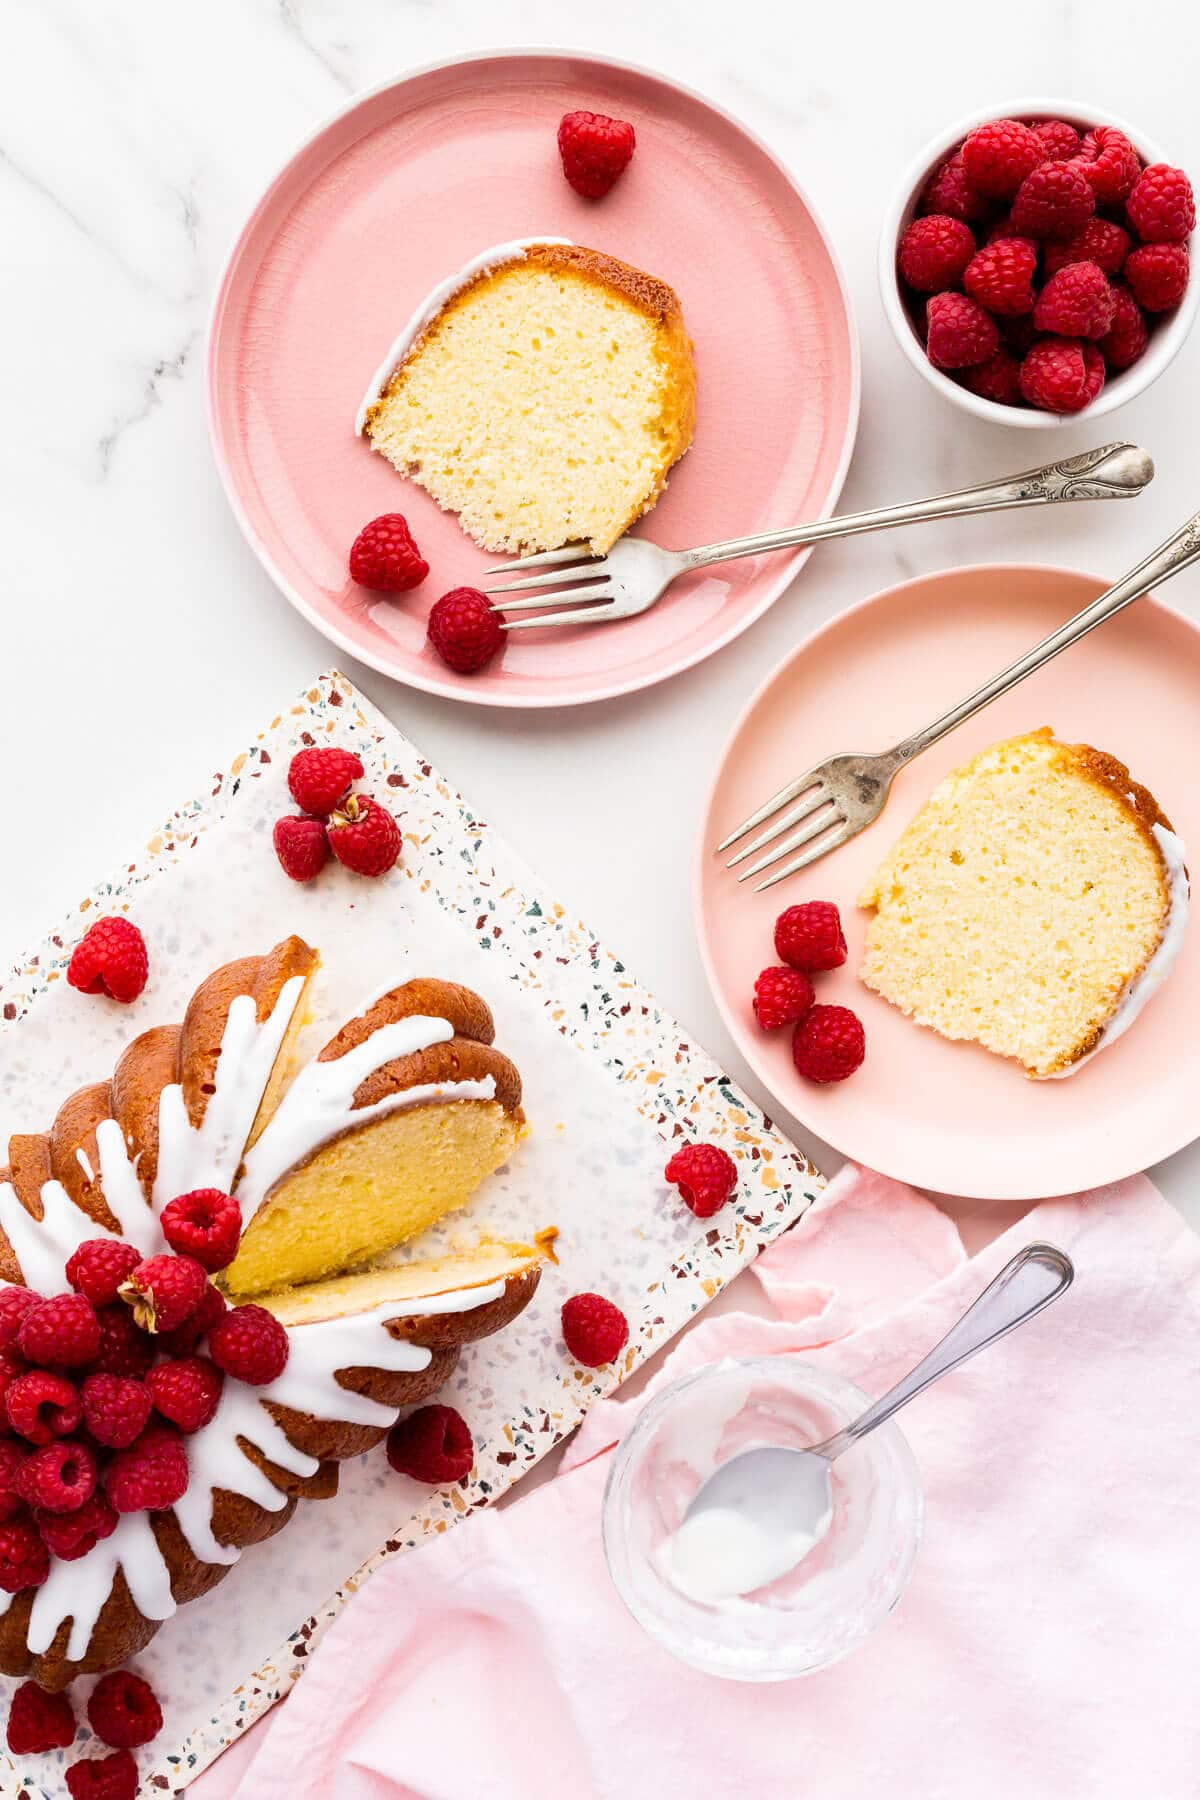 Slices of lemon bread on pink plates, served with raspberries.